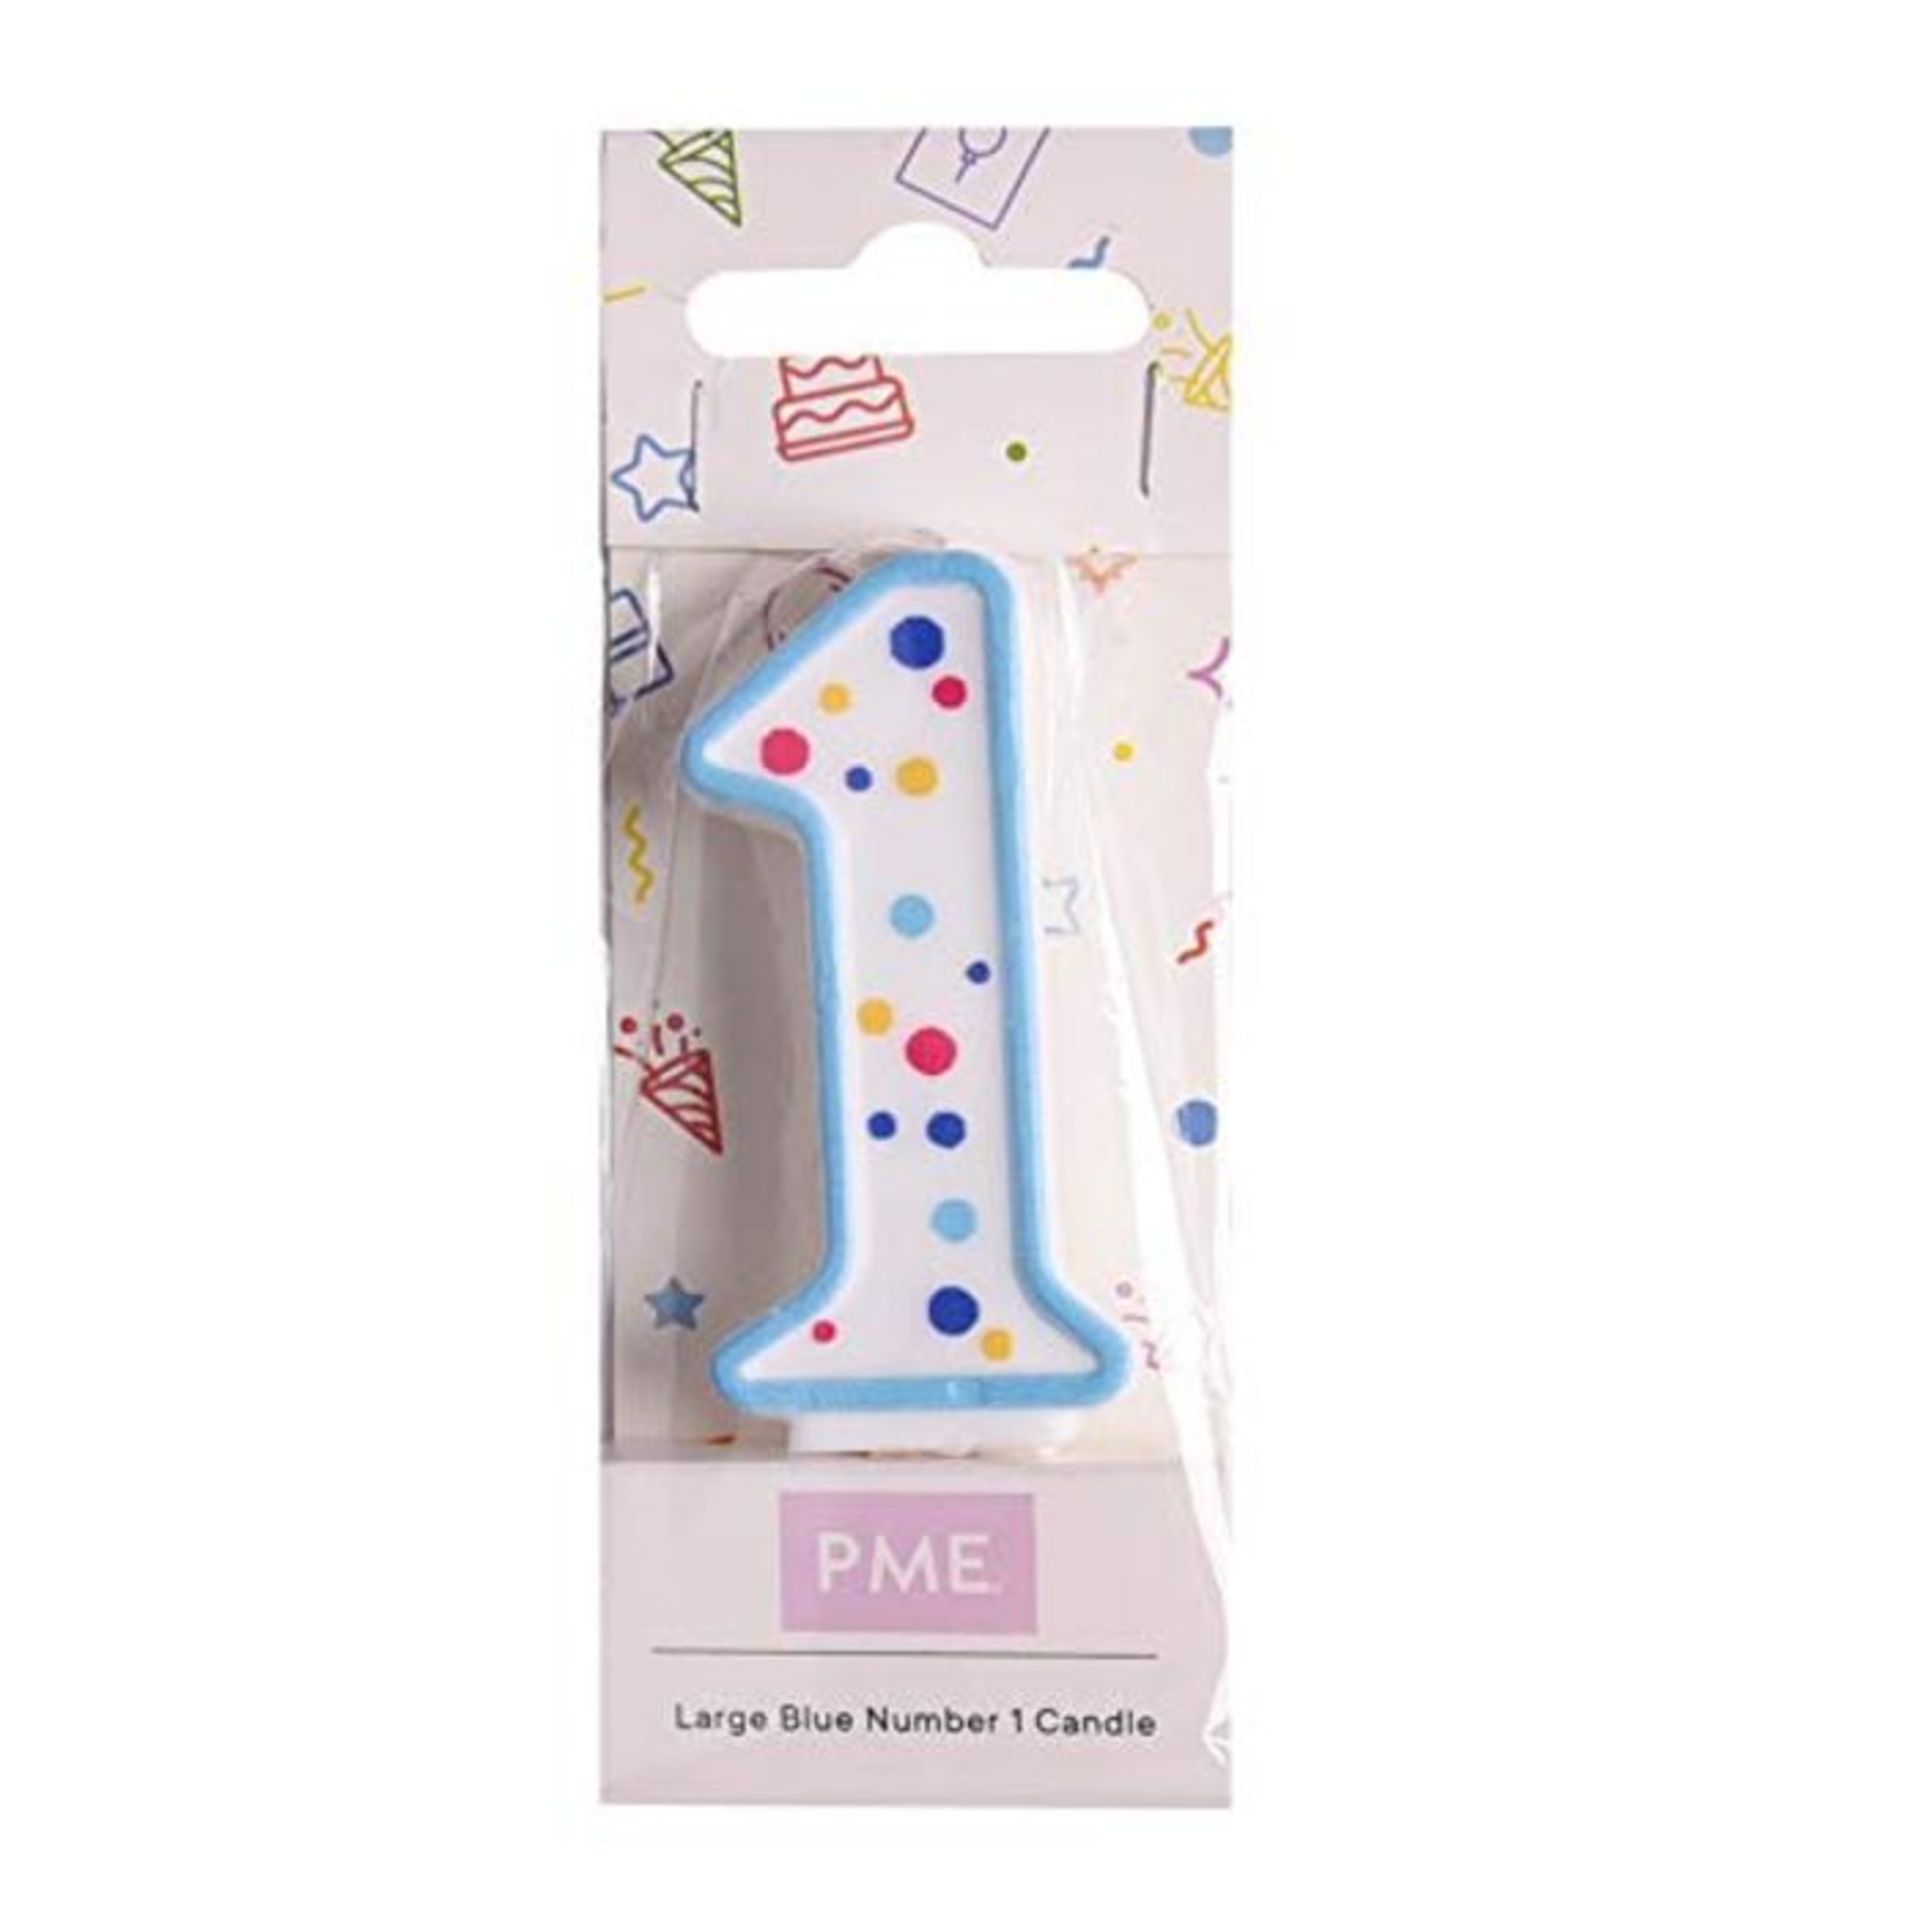 PME Blue Number 1 Candle, Large Size